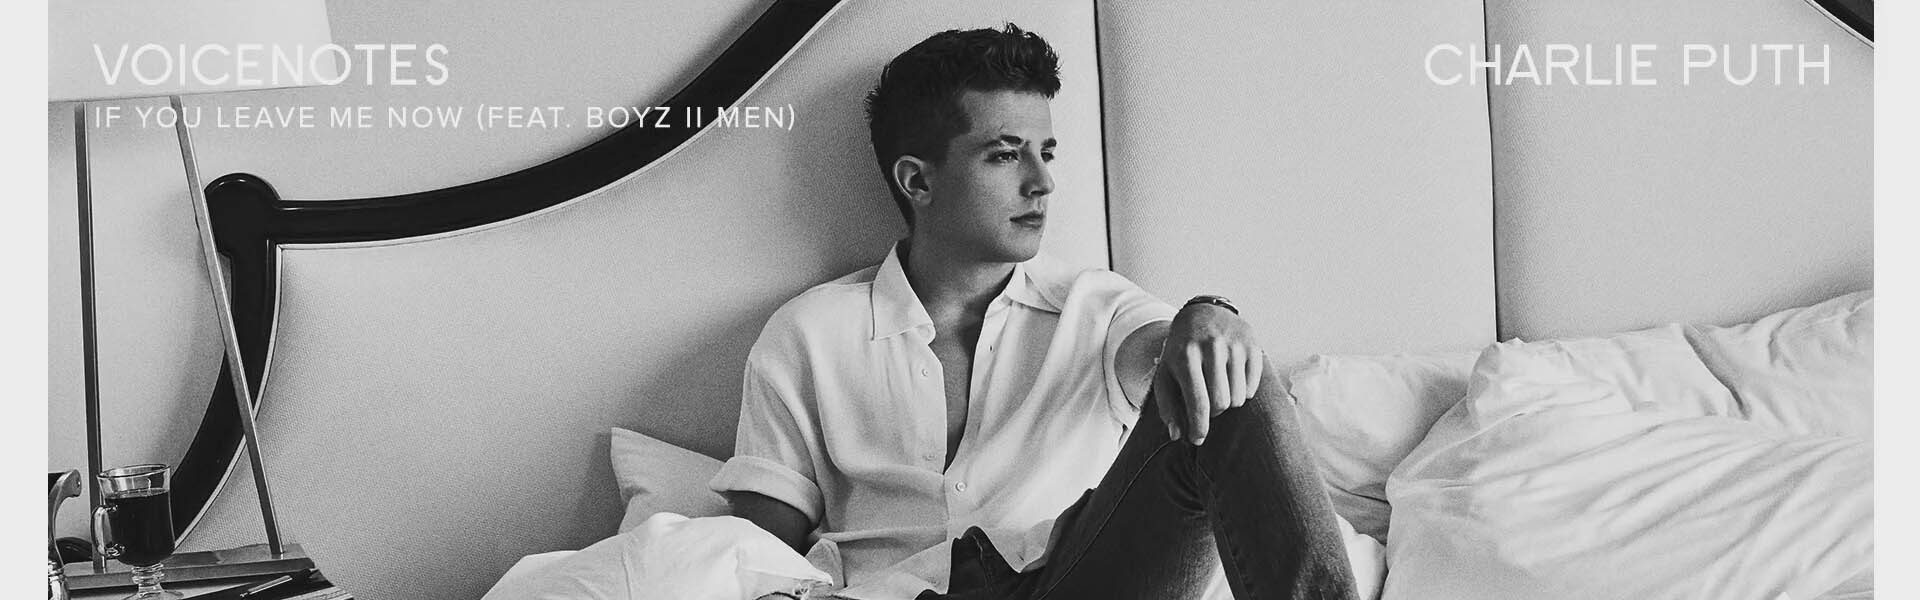 charlie-puth-if-you-leave-me-now-feat-boyz-ii-men_10155874-4030_1920x1080